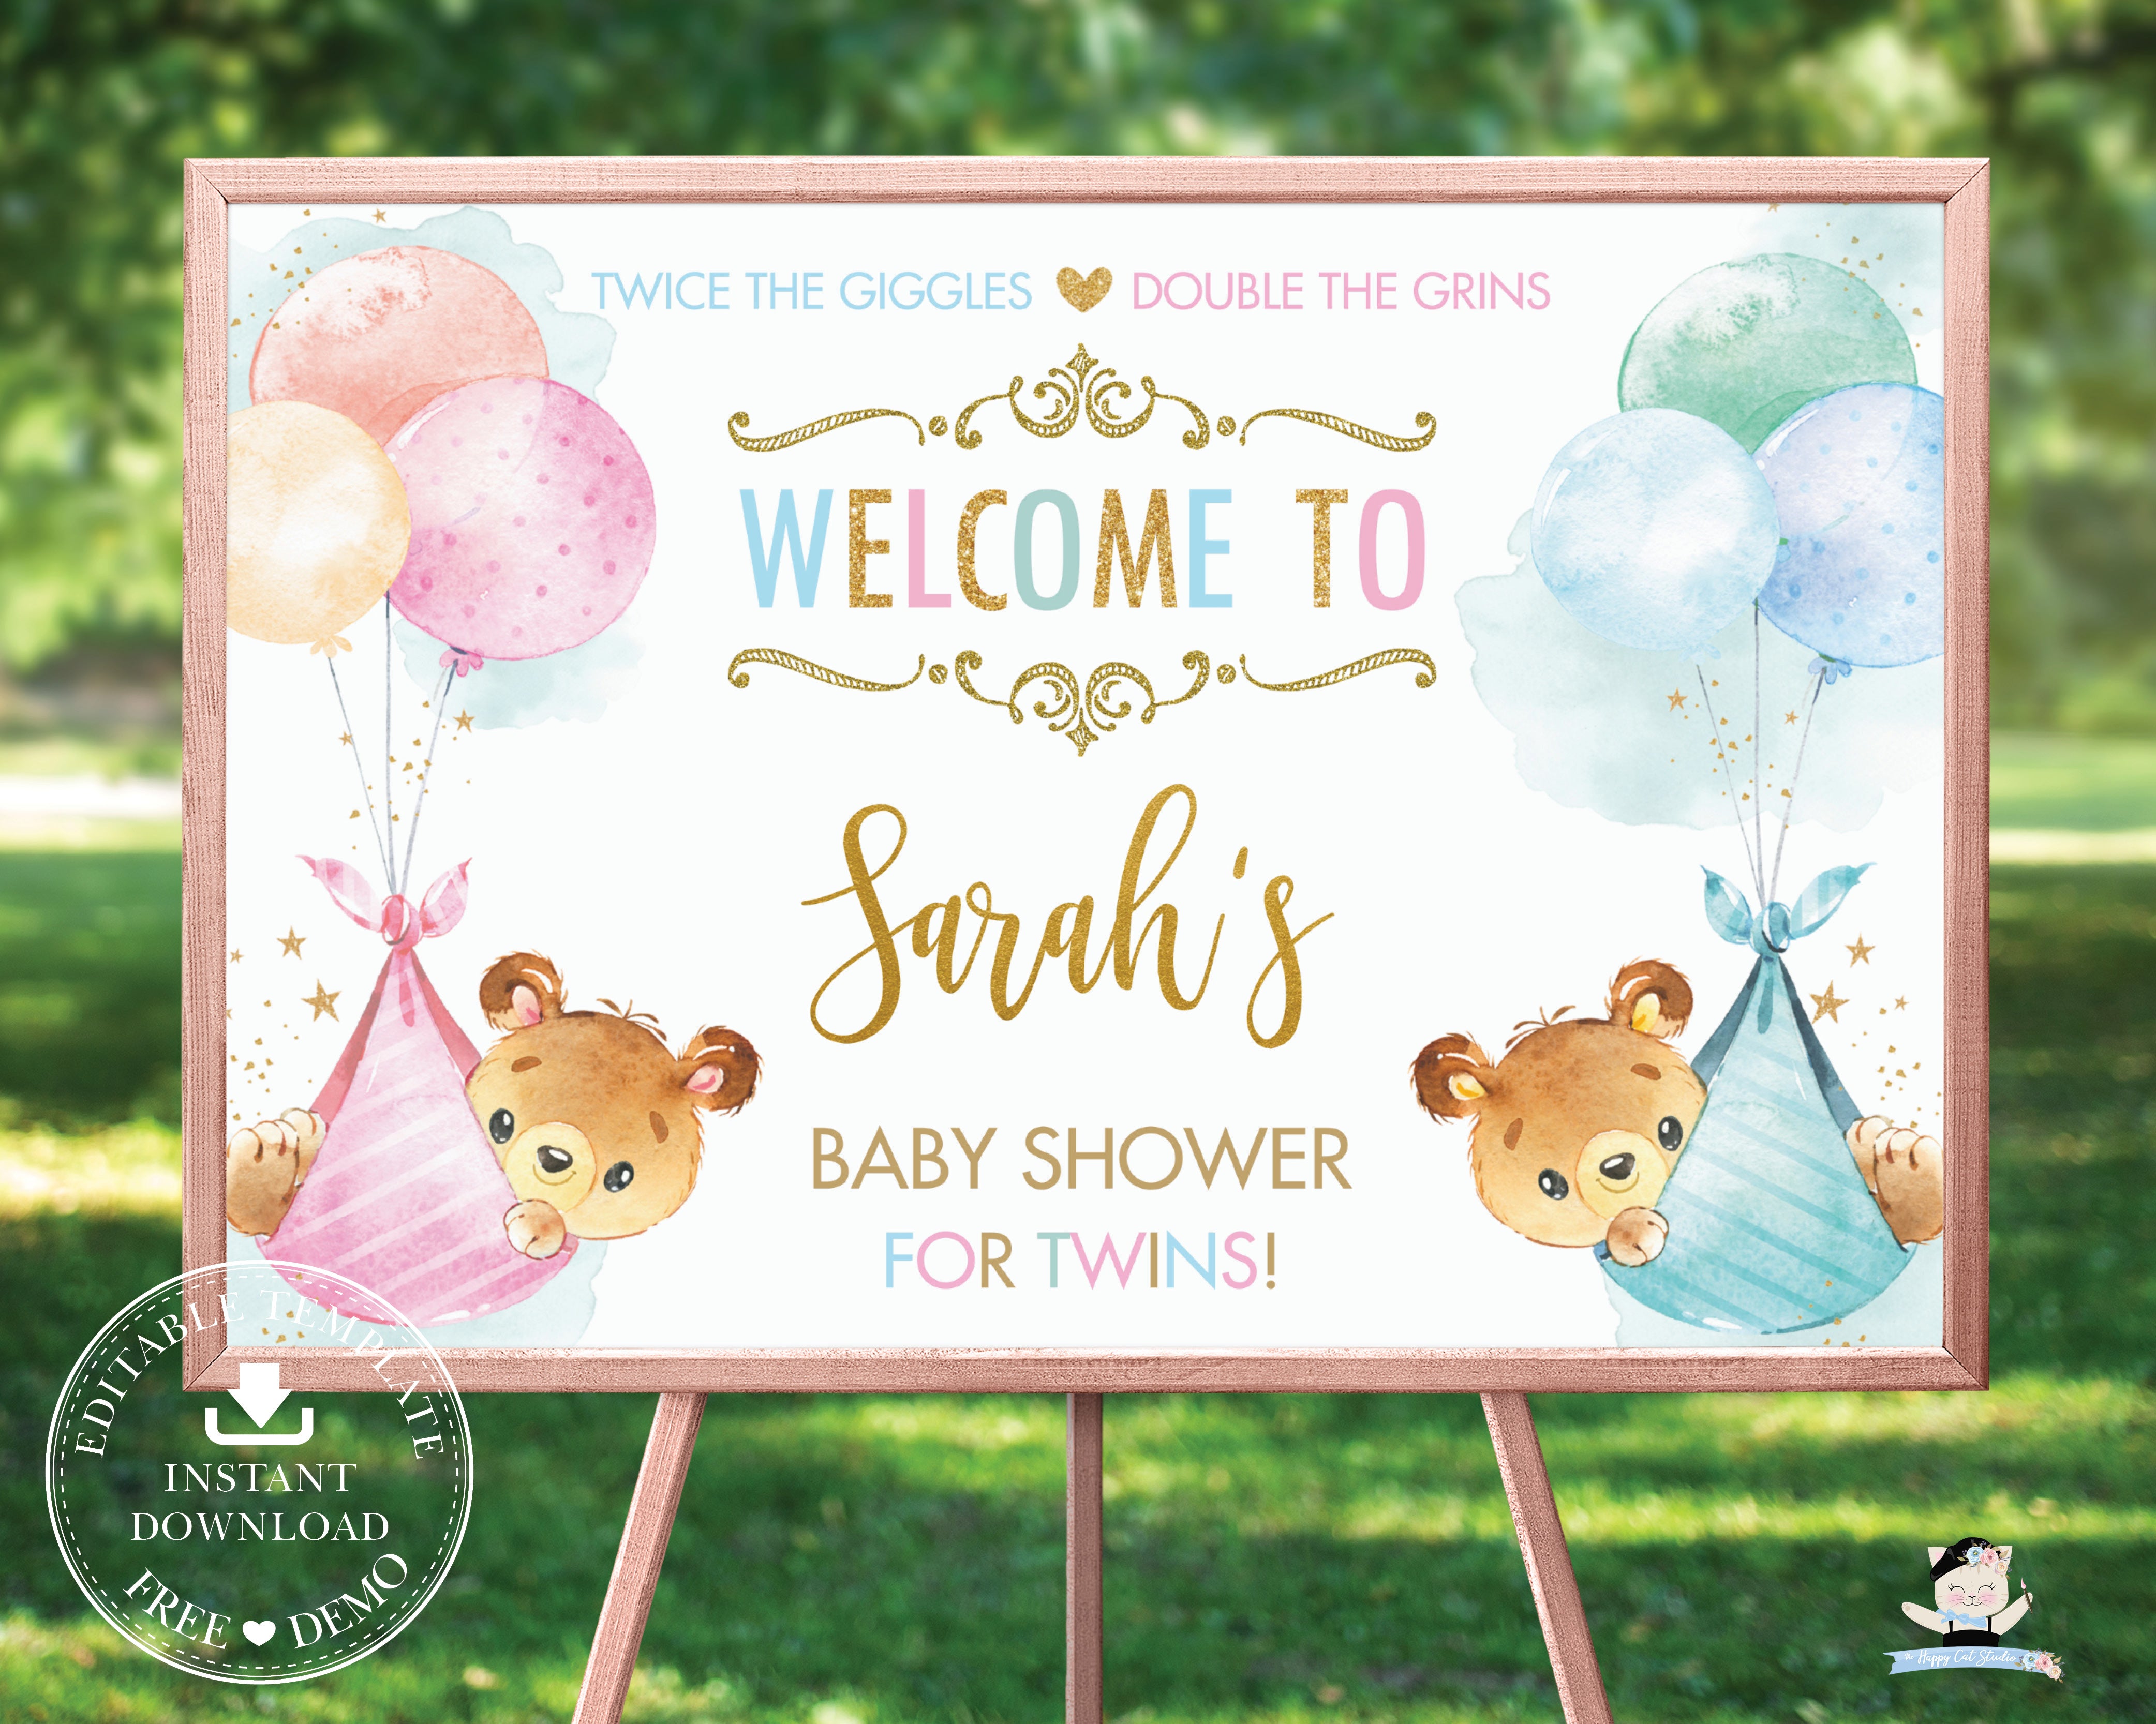 cute welcome sign